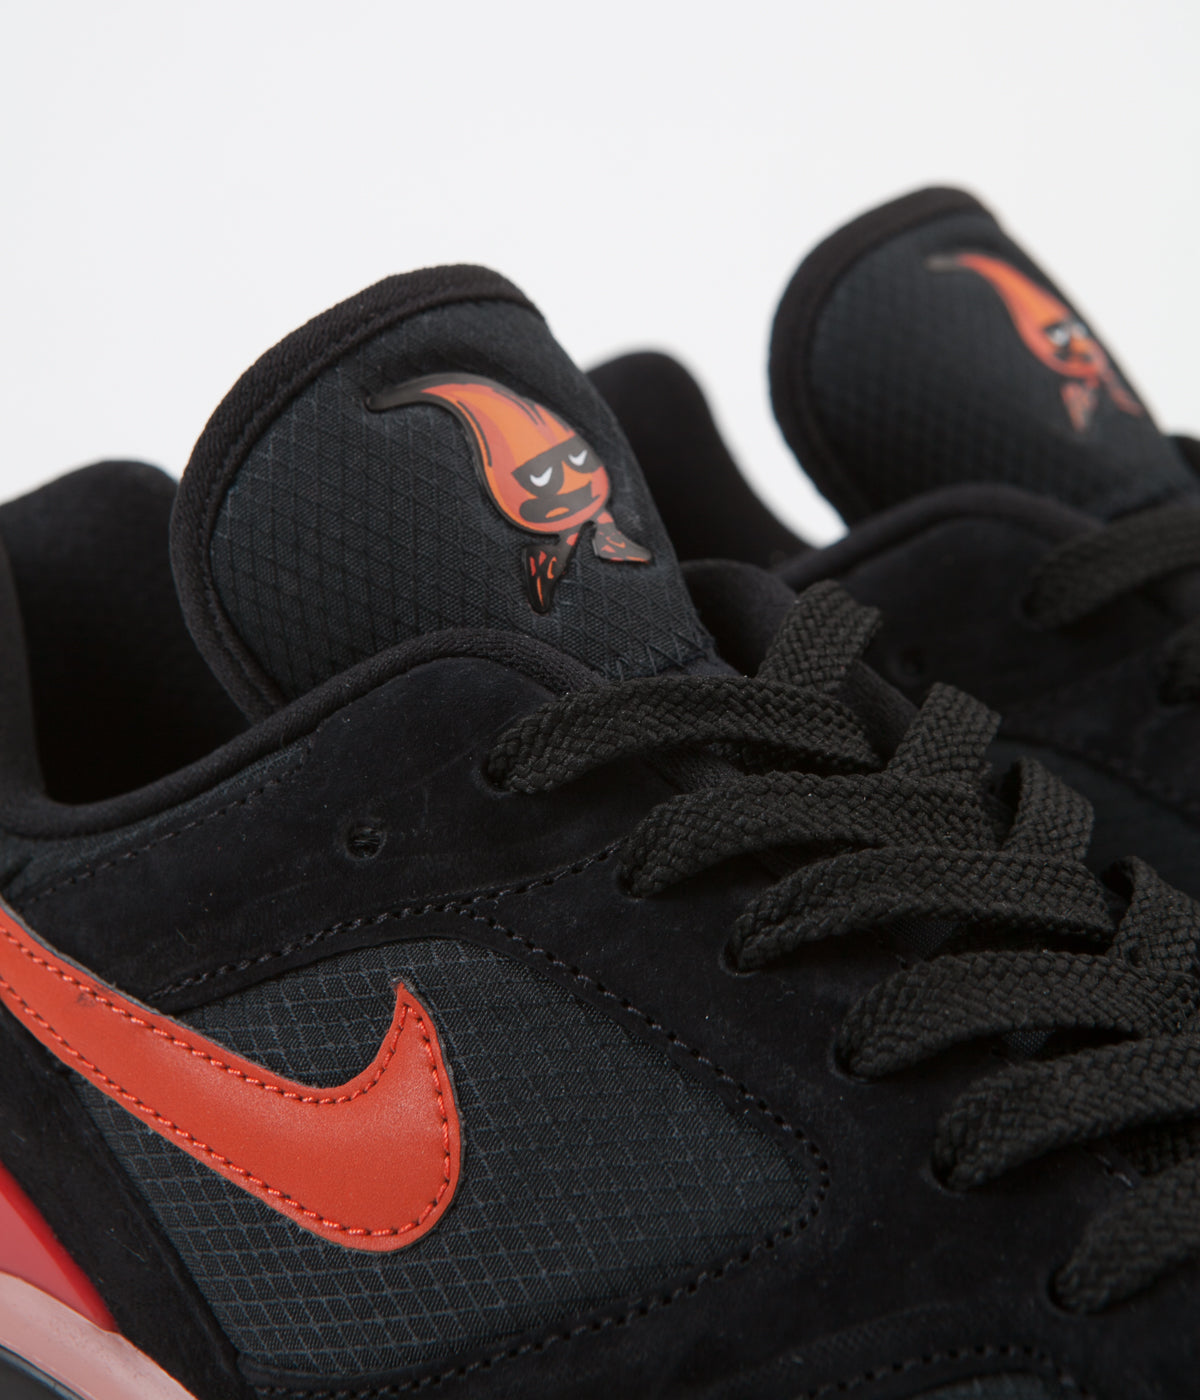 Nike Air Max 180 Shoes Black Team Orange - University Red | Always in Colour